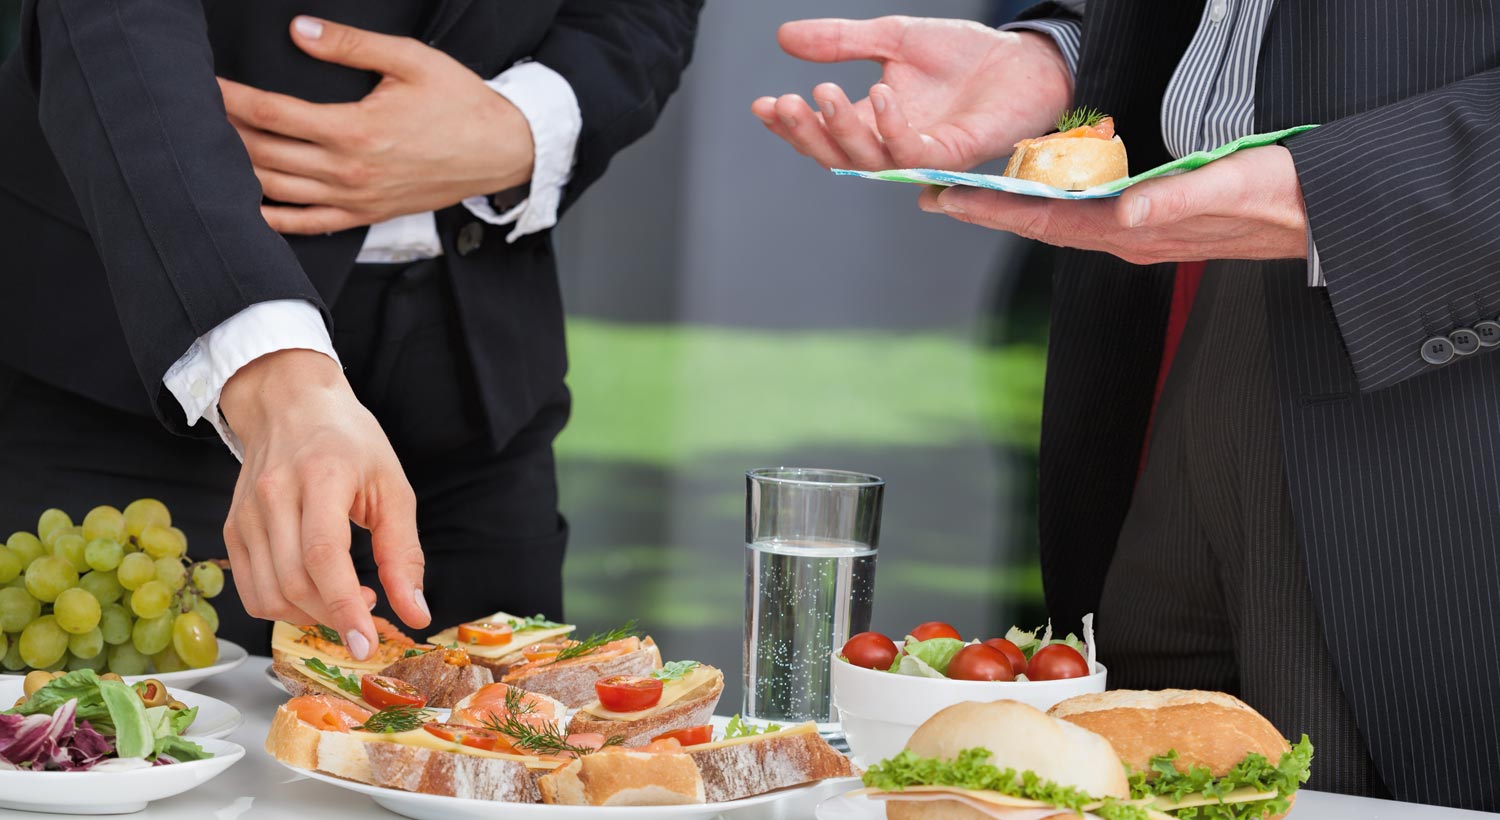 Catering Business 5 Ways to Take Your Catering Business to the Next Level - 2